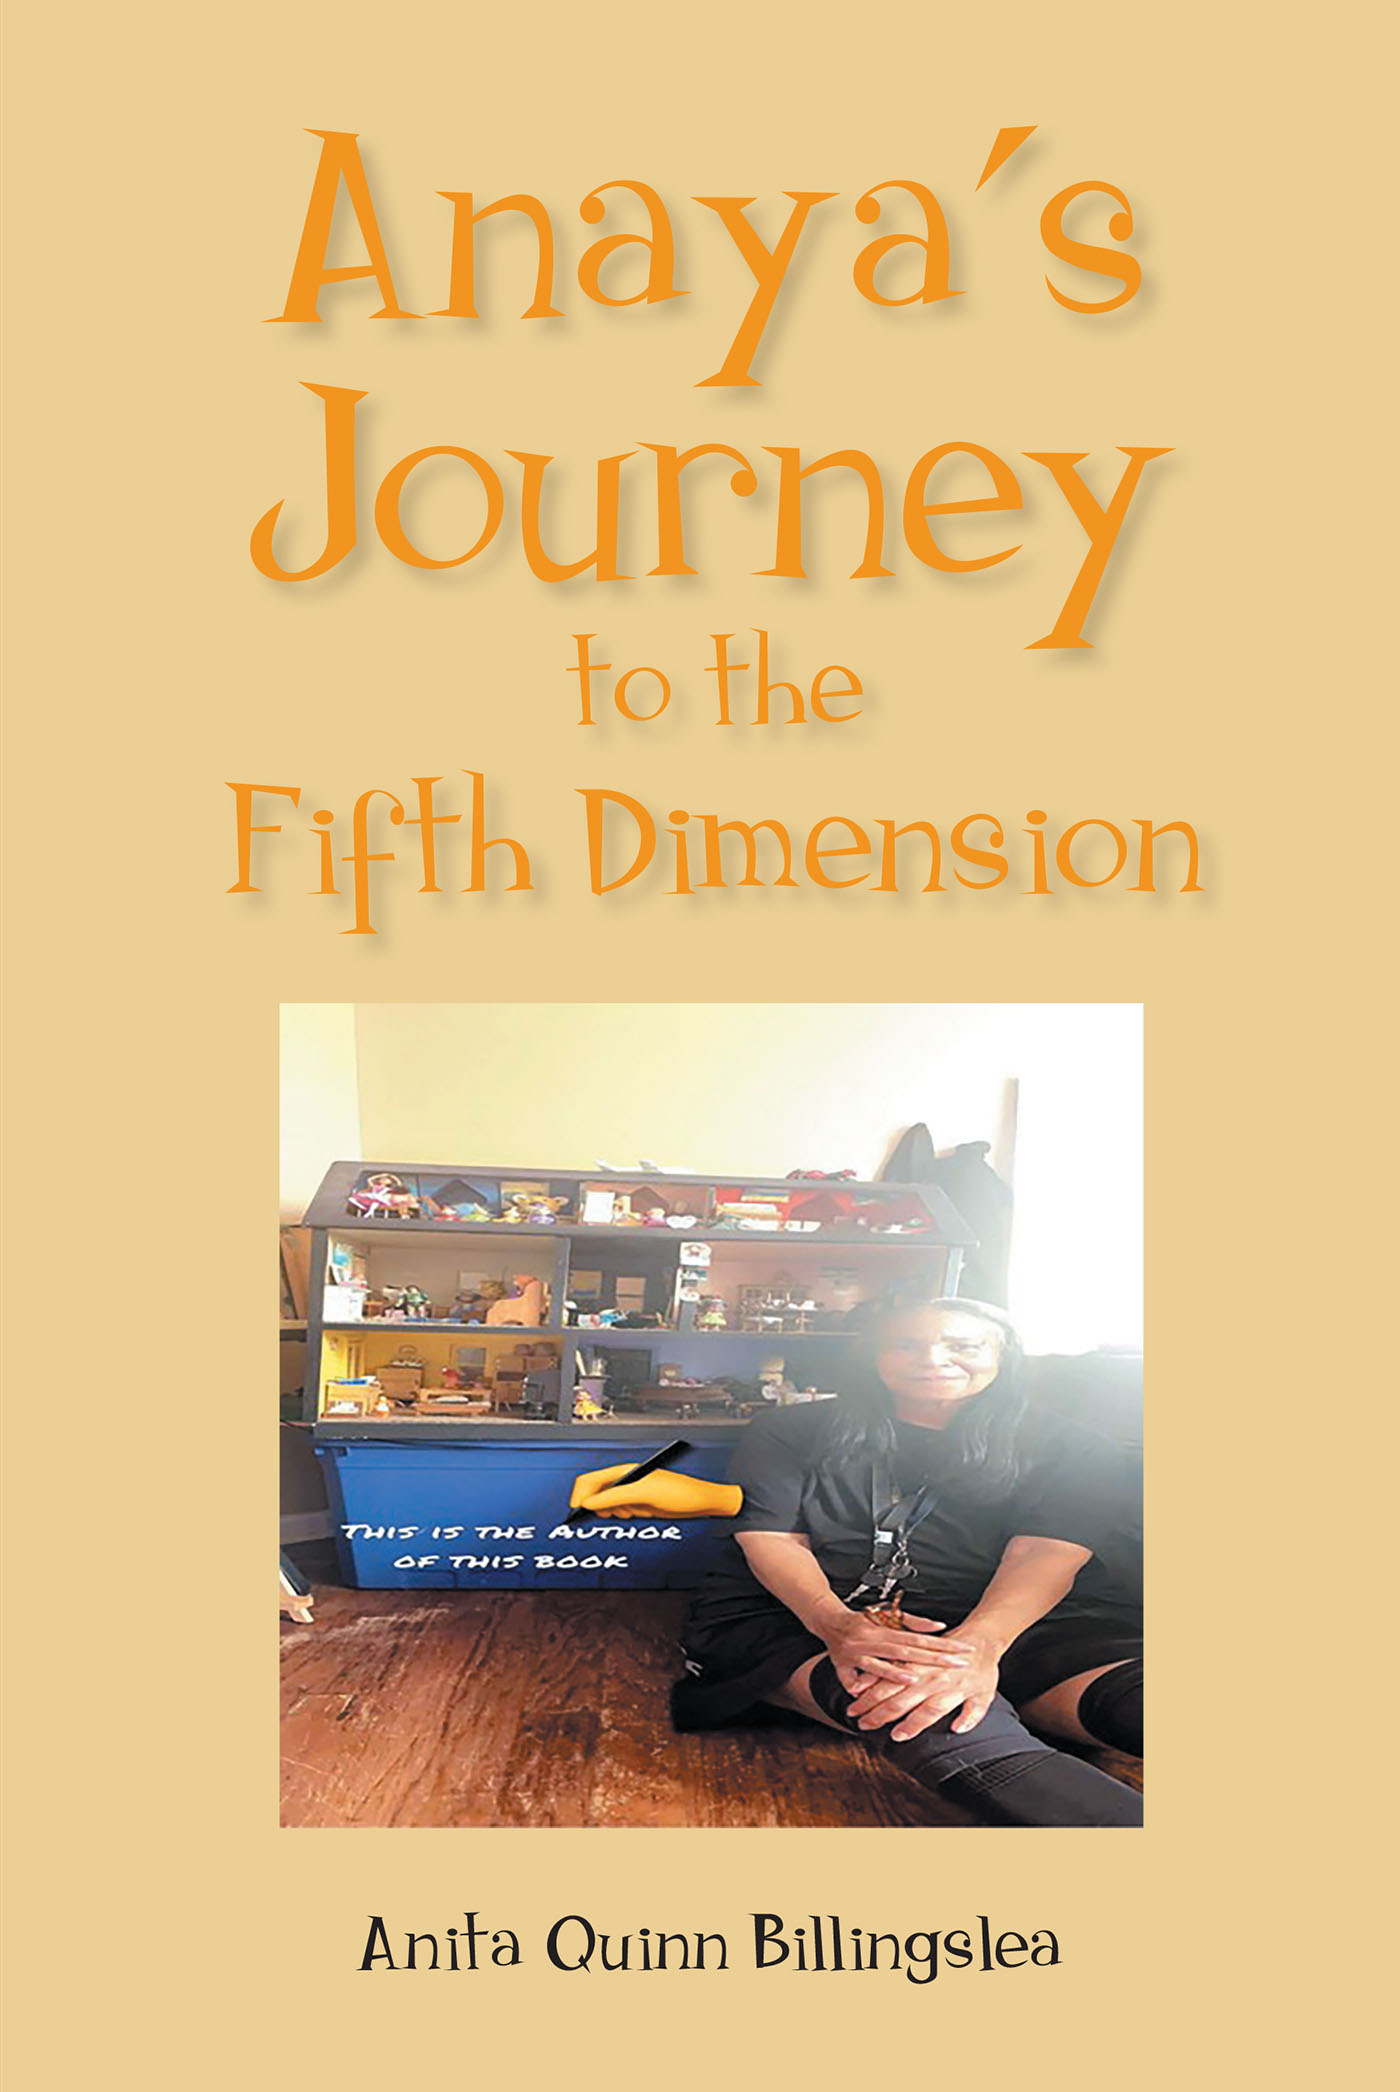 Author Anita Quinn Billingslea’s New Book, “Anaya’s Journey to the Fifth Dimension,” Follows One Woman’s Ascension as She Strengthens Her Connection to God